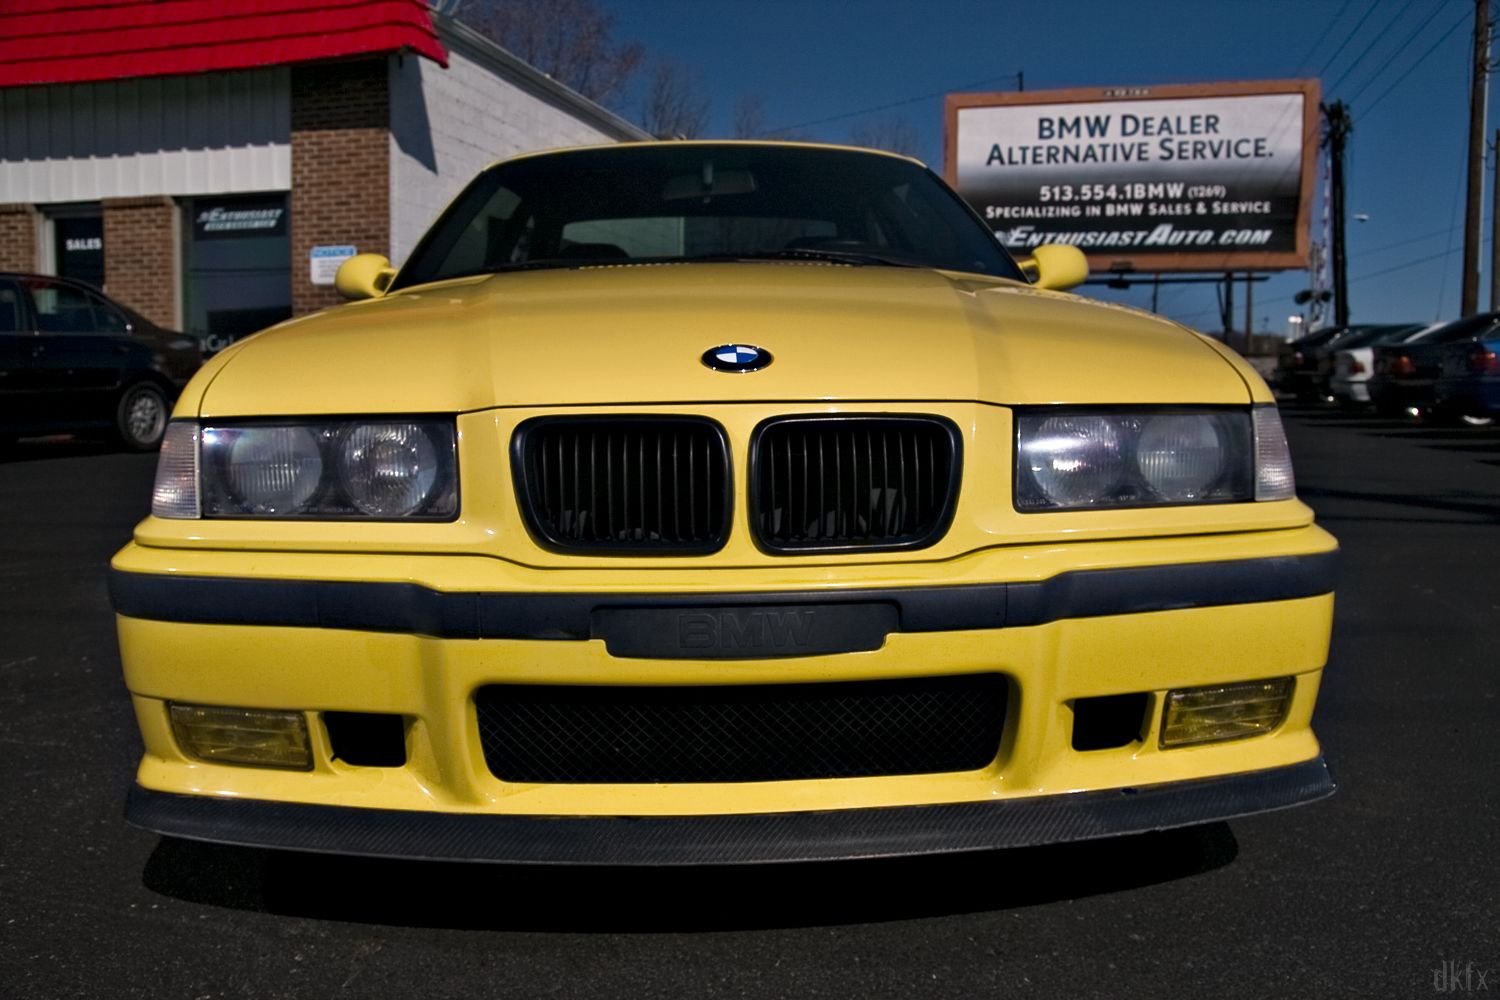 Front Bumper with Fog Lights on Yellow BMW 3-Series - Photo by dan kinzie